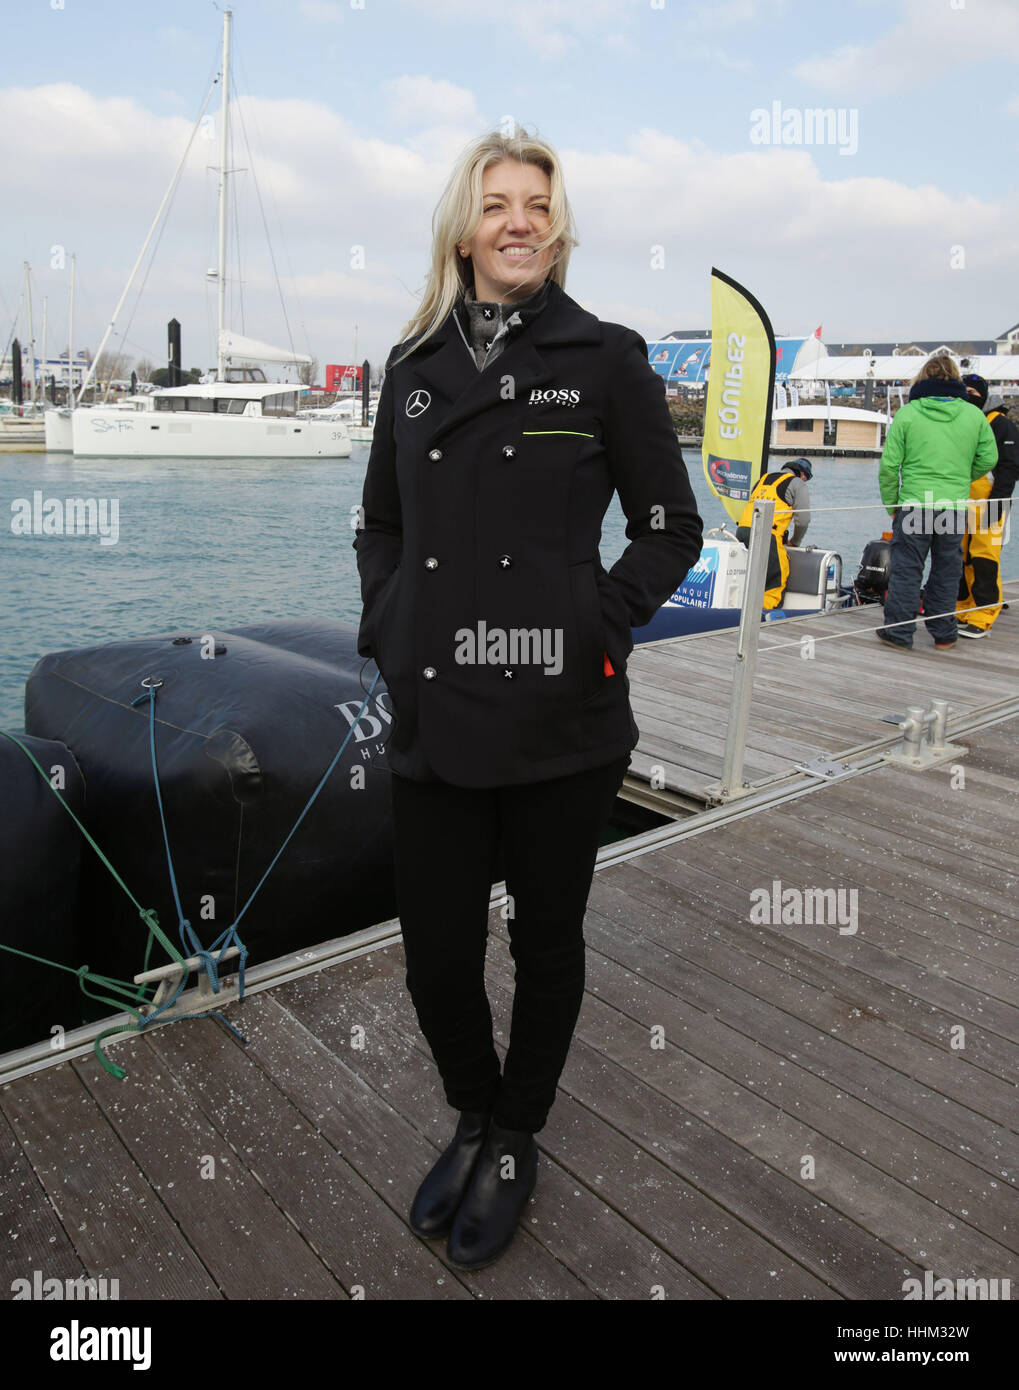 Kate Thomson, wife of British sailor Alex Thomson, during media interviews  at Les Sables d'Olonne, western France, as she awaits her husband's finish  in the Vendee Globe race Stock Photo - Alamy